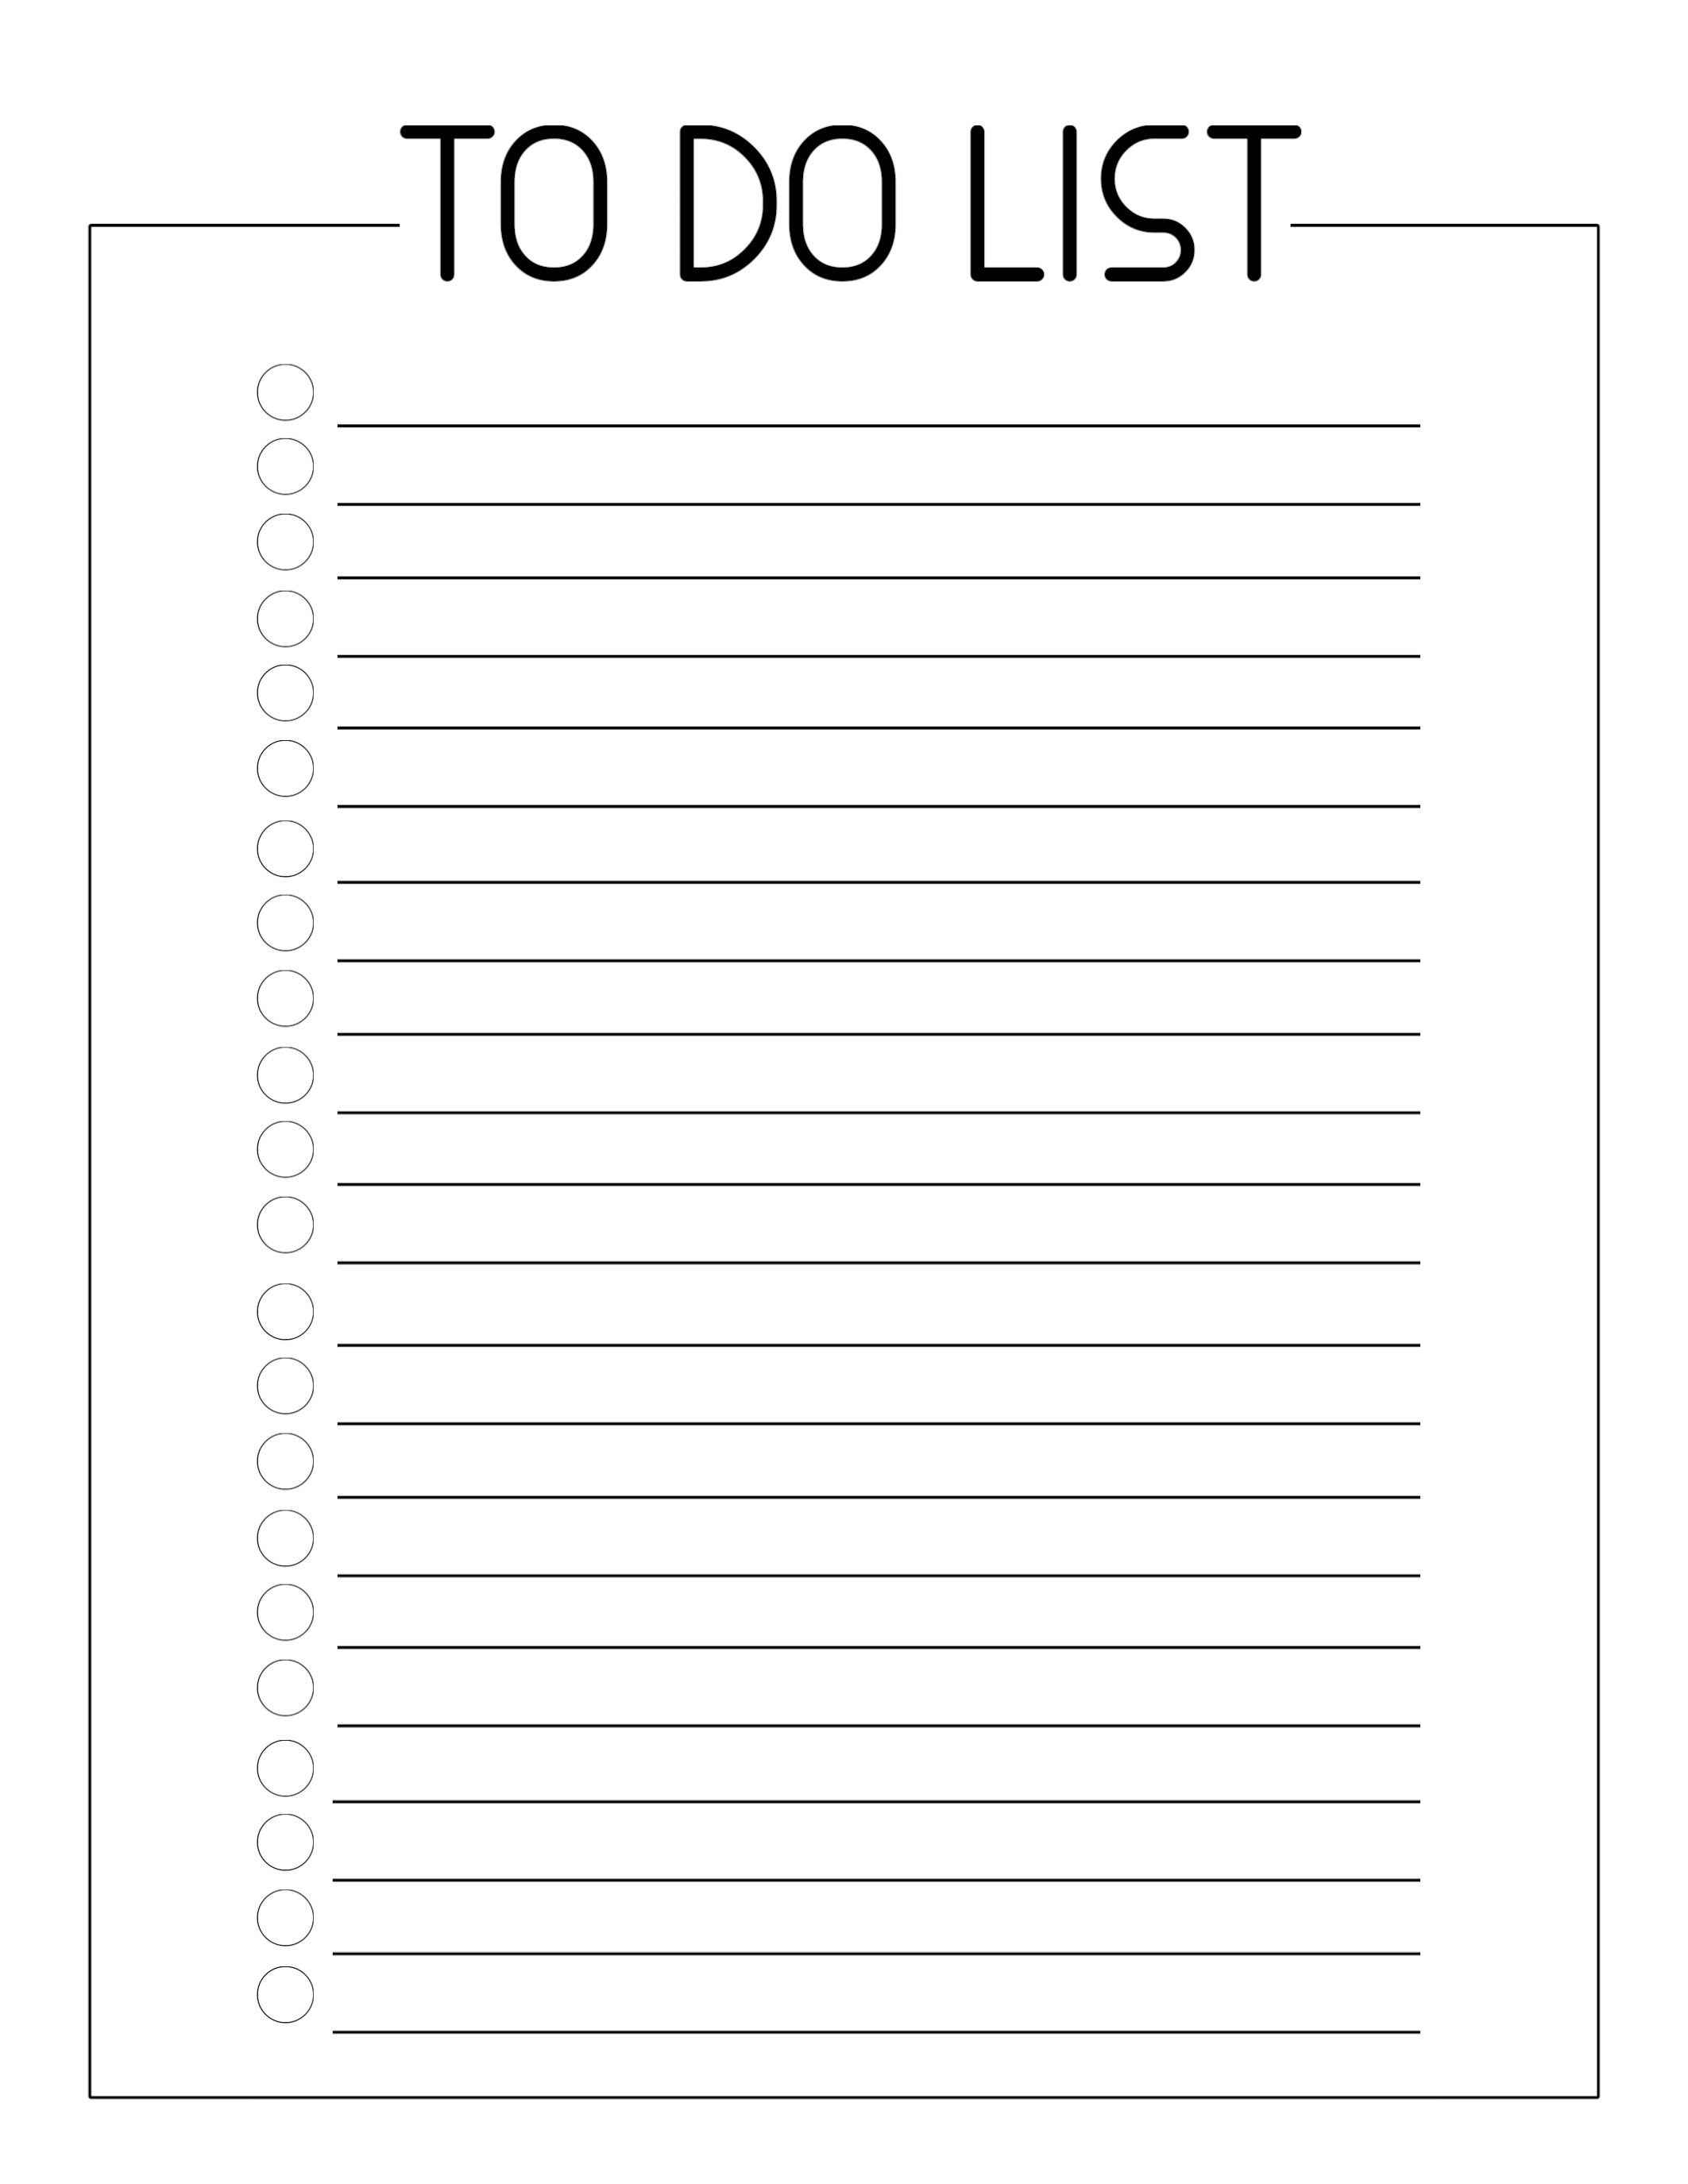 Free Printable To Do Checklist Template - Paper Trail Design - Free Printable List Paper